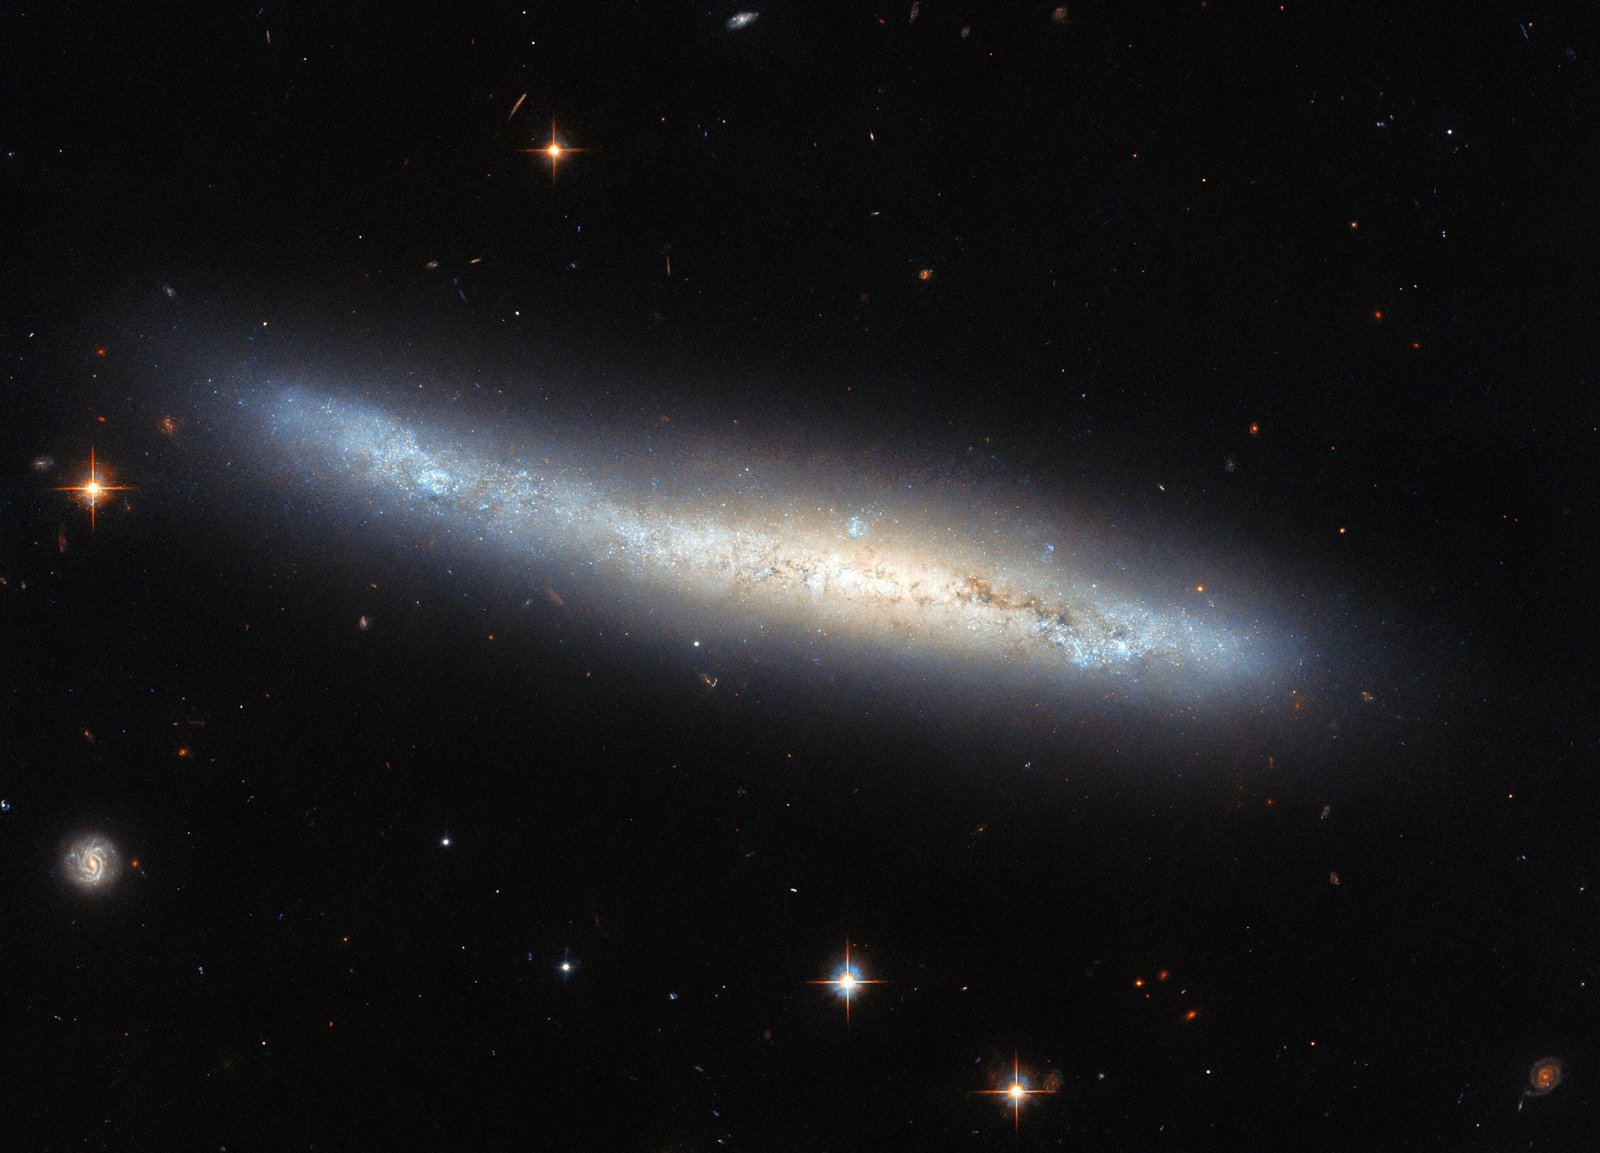 Hubble Spots a Spiral Galaxy in Disguise